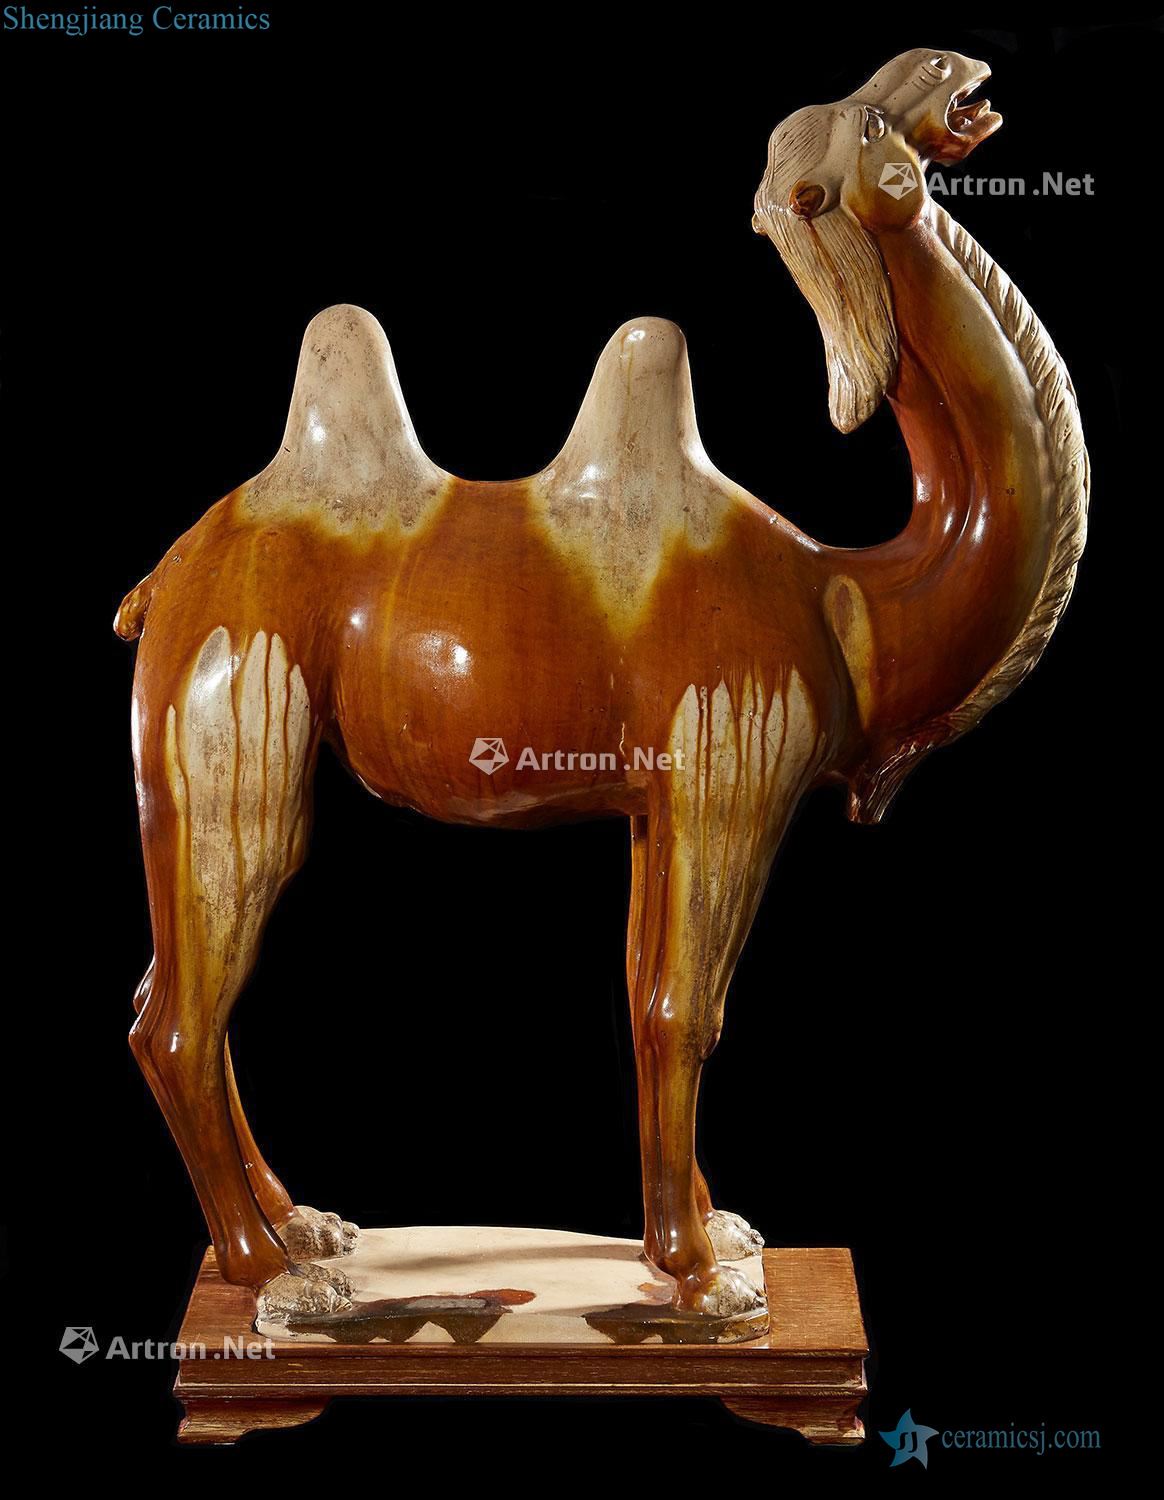 AN EXCEPTIONAL CHINESE GLAZED POTTERY FIGURE OF A BACTRIAN TWO - HUMPED CAMEL